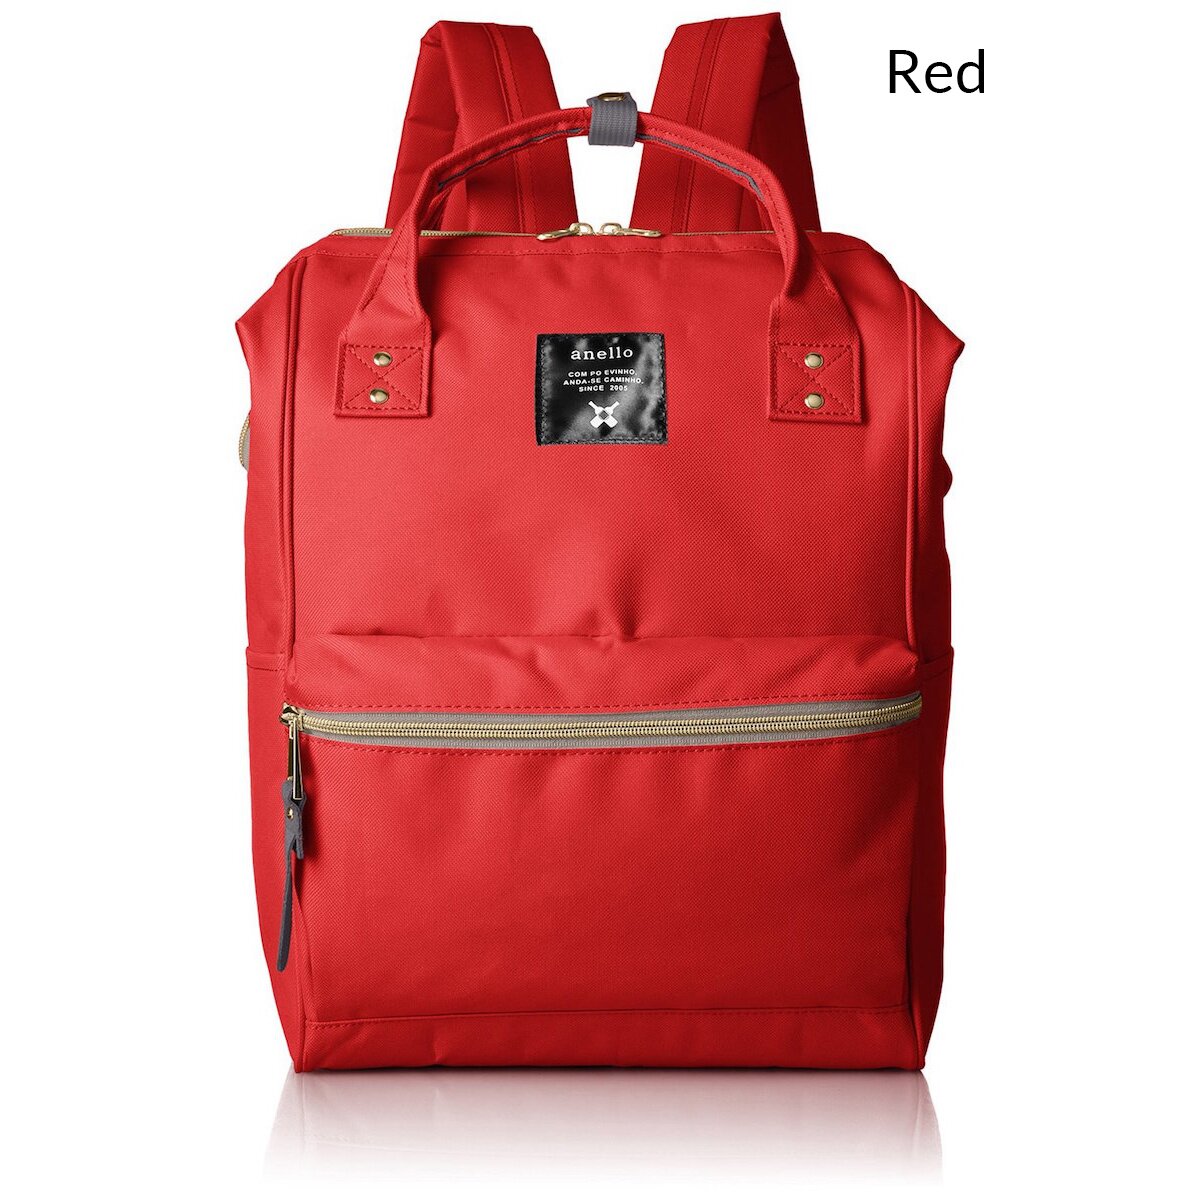  Red Anello backpack, - Never used